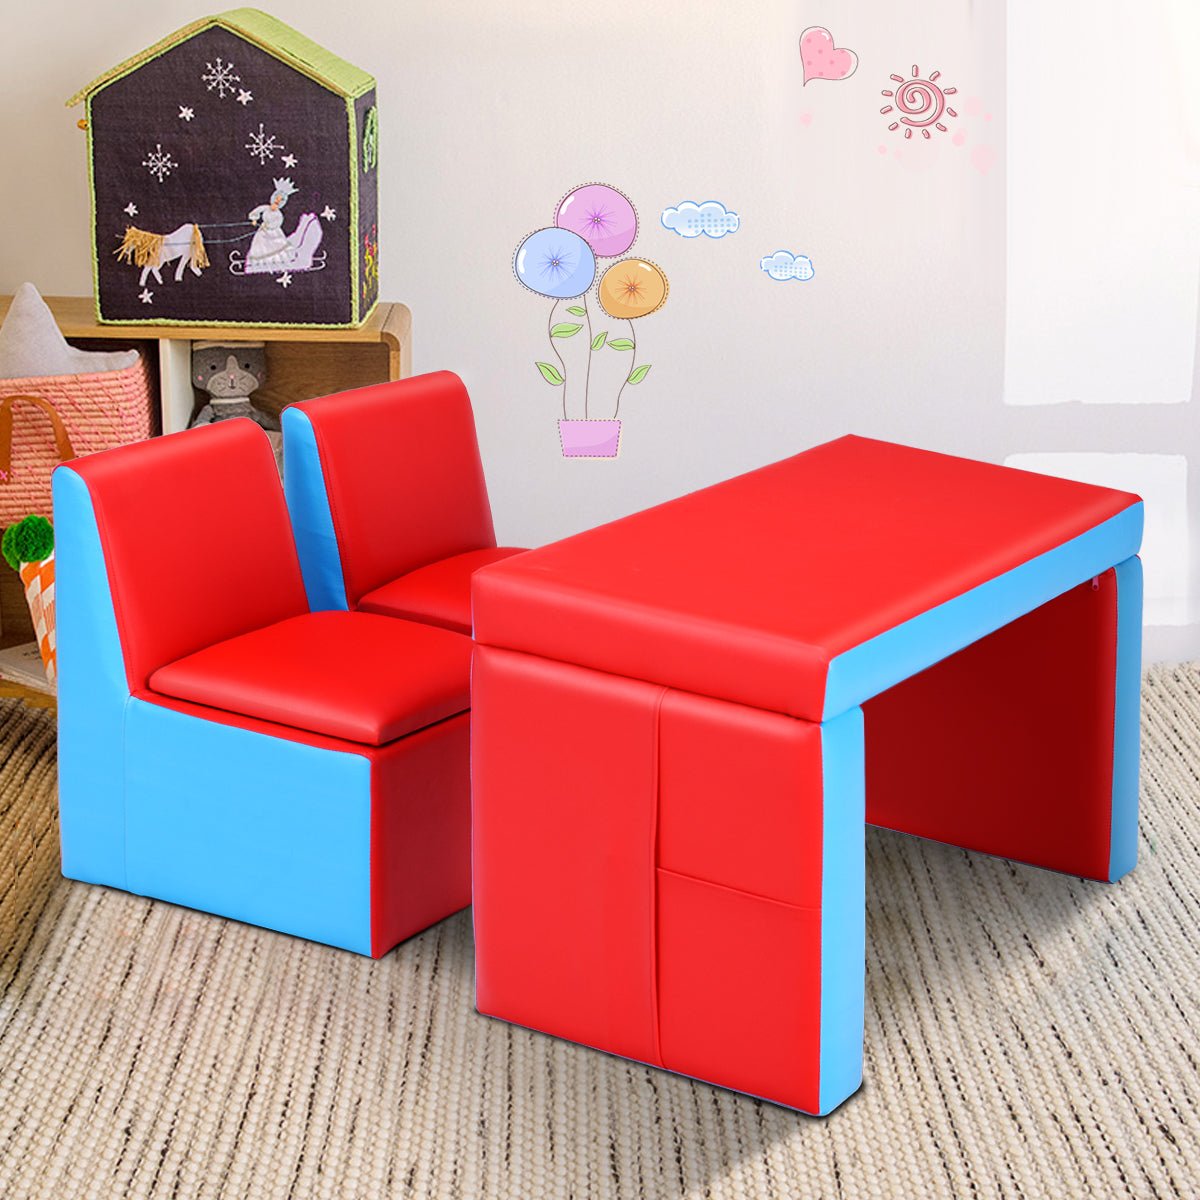 2-in-1 Children's Sofa with Storage Space - Playful Design and Practicality